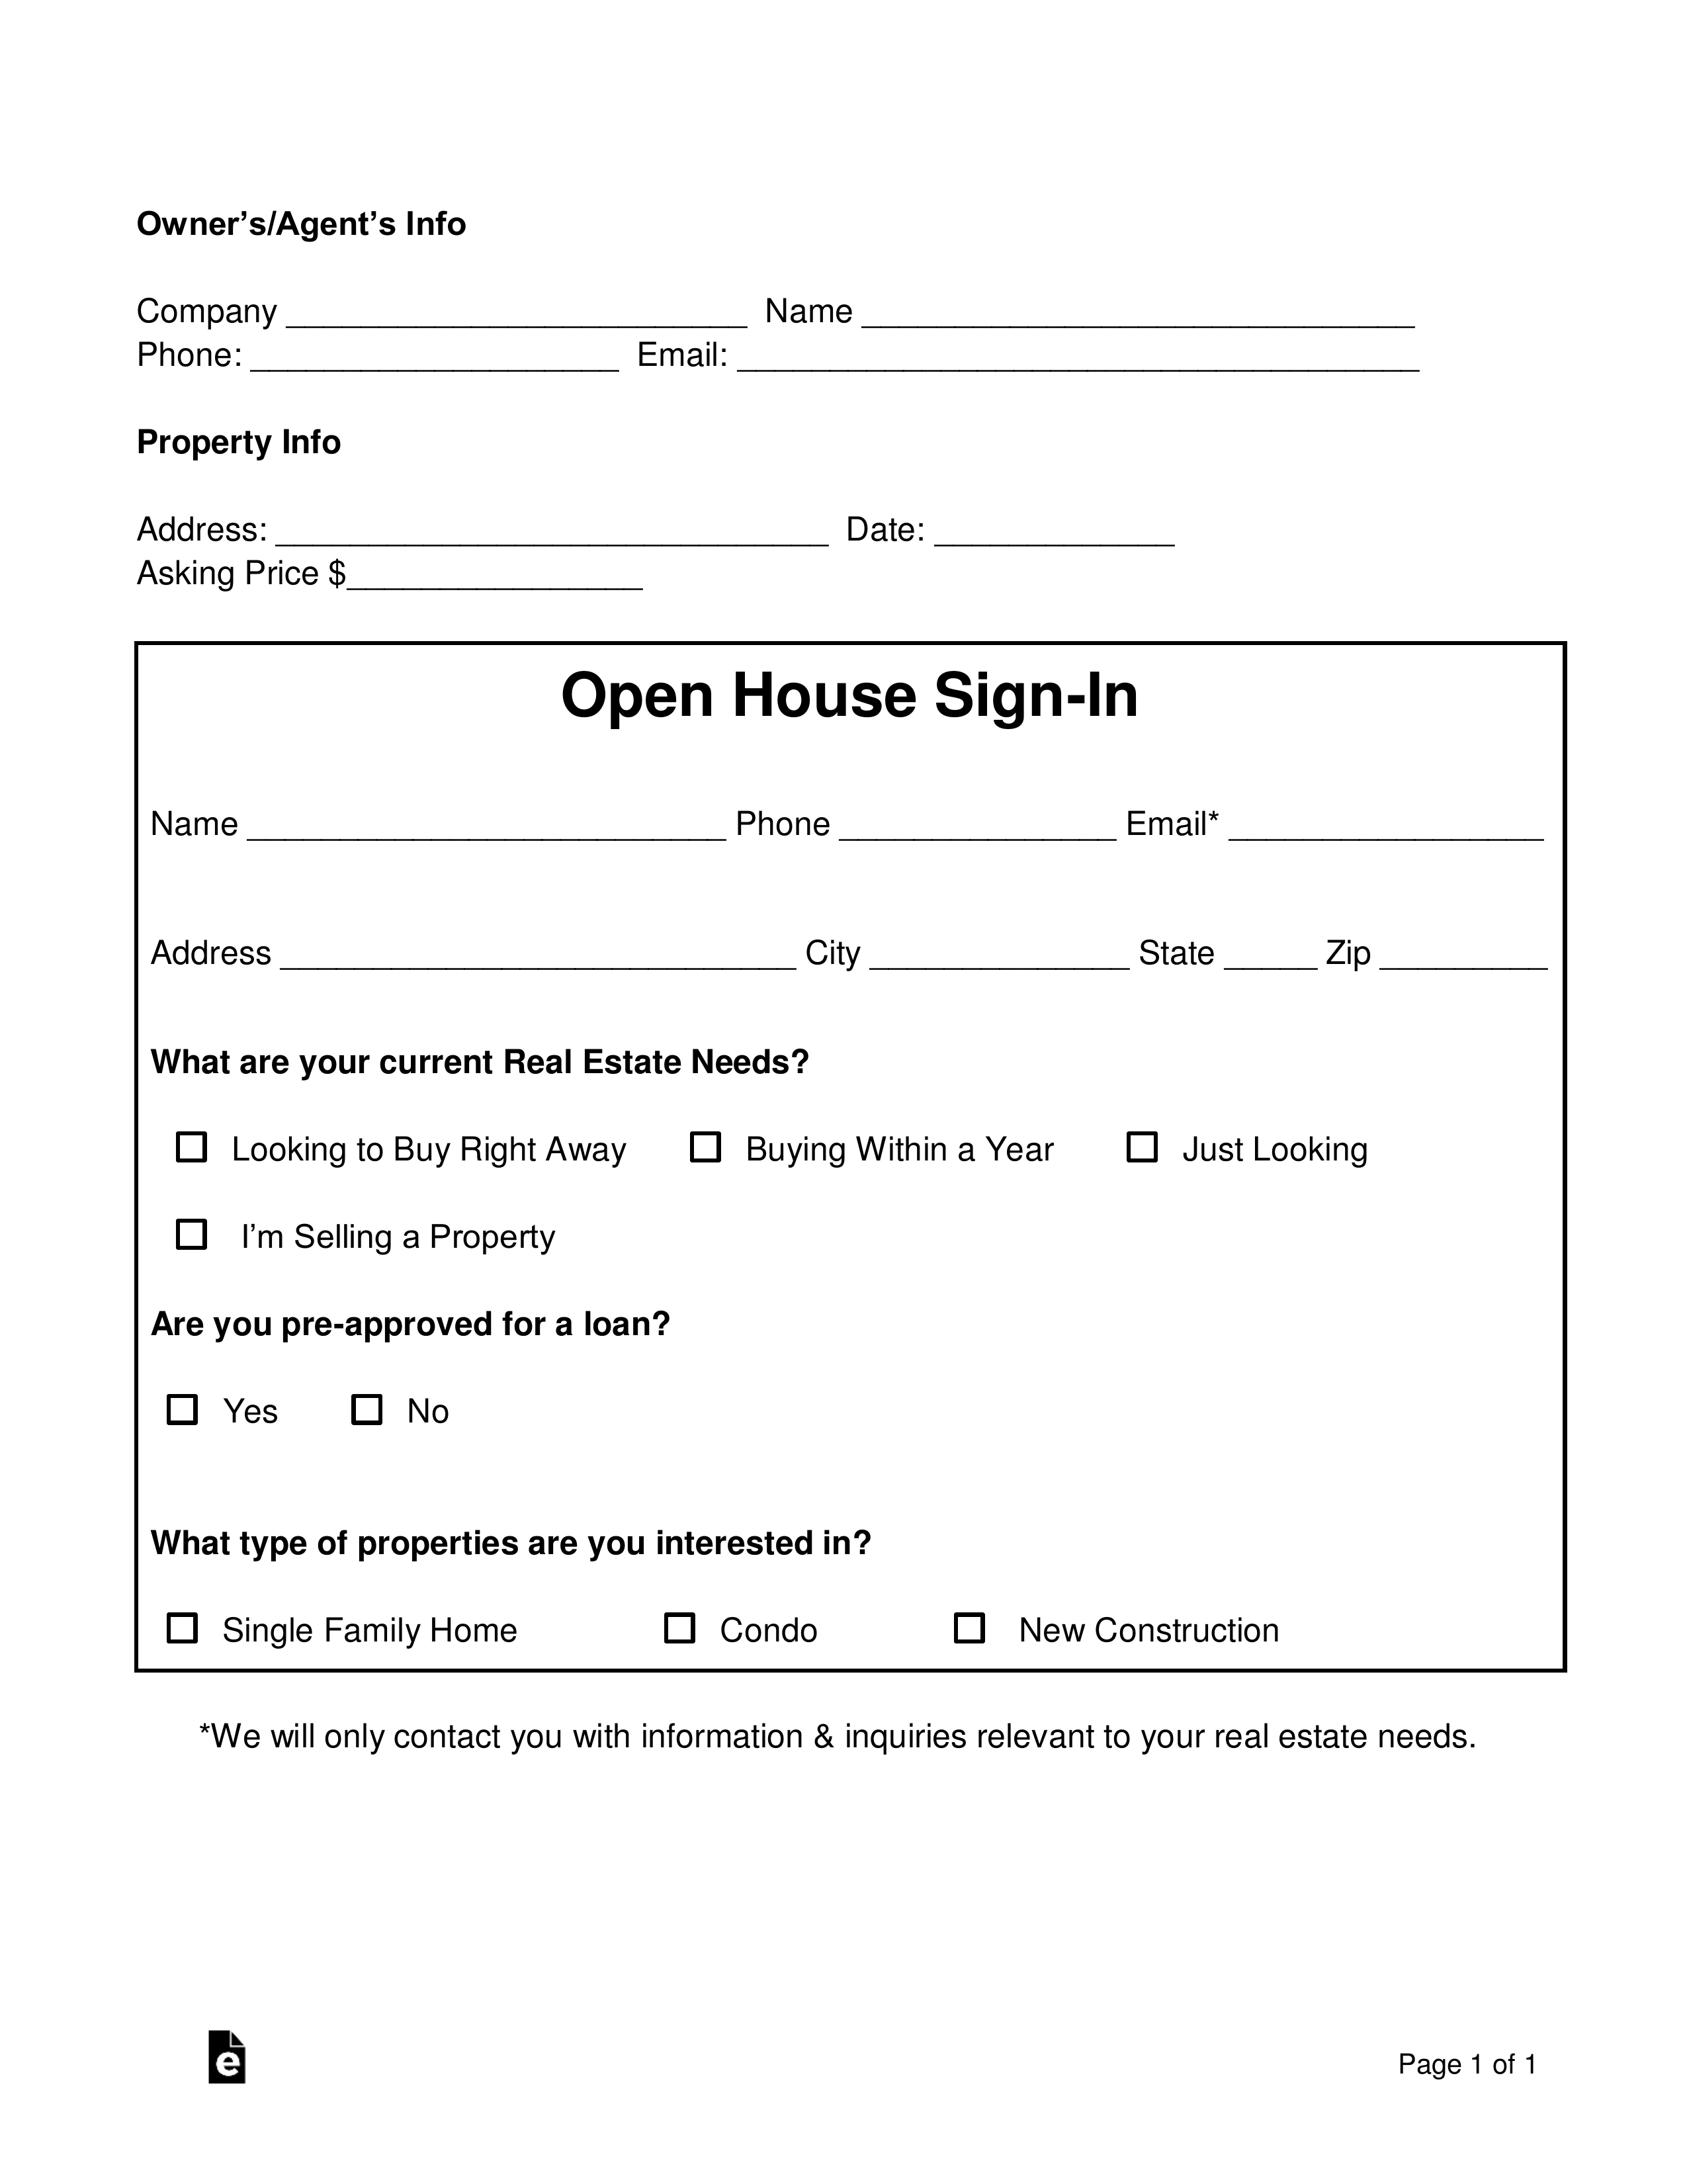 Detailed Real Estate Open House Sign-in Sheet